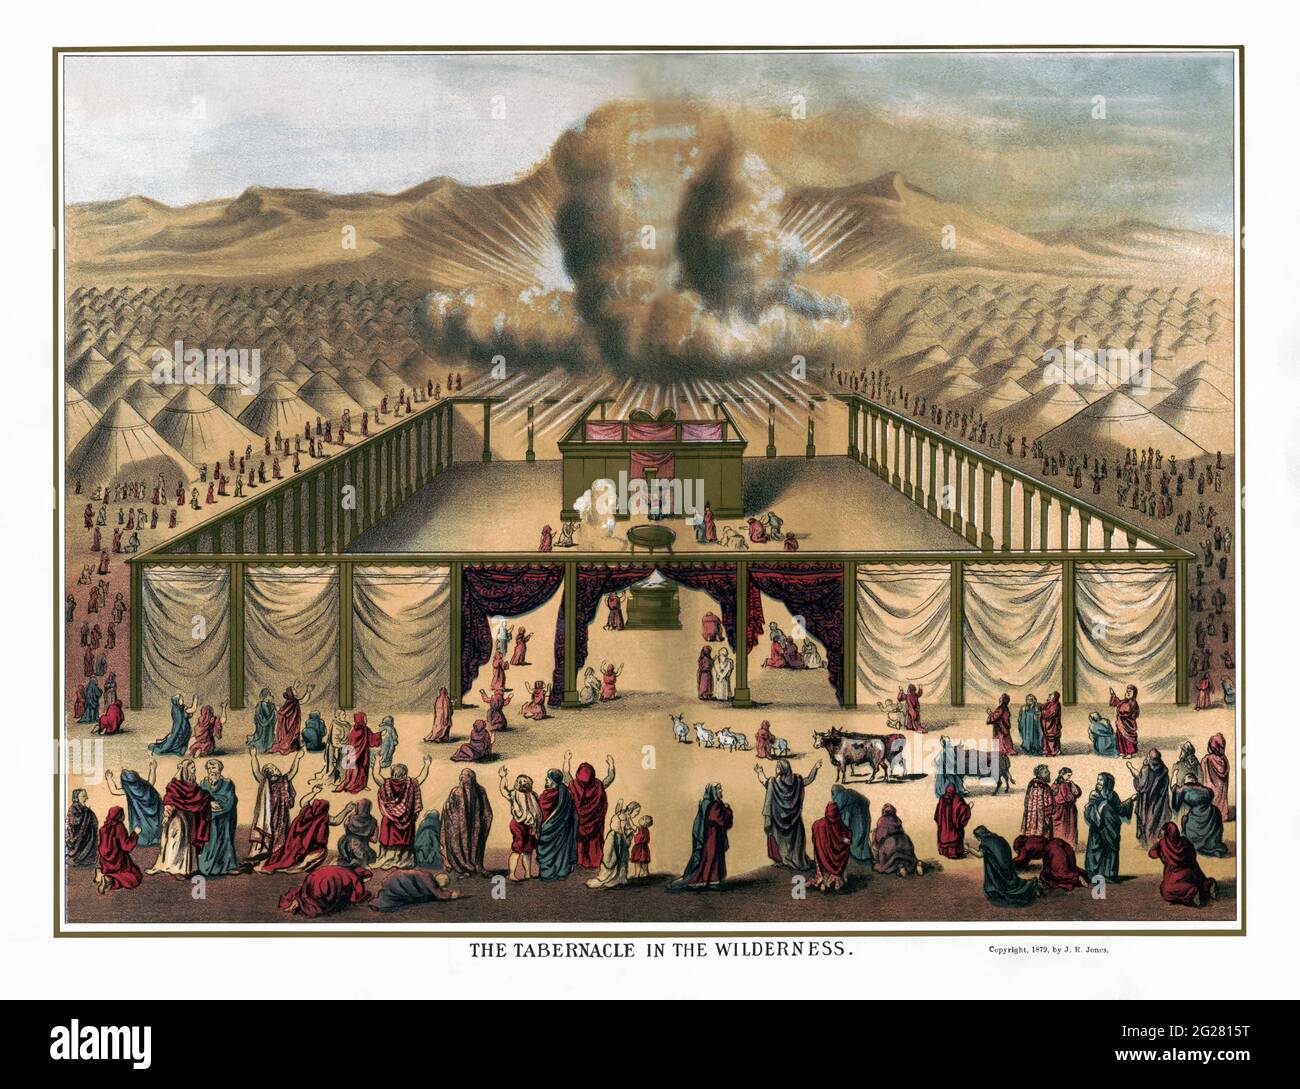 The tabernacle in the wilderness, from the Book of Exodus, the Old